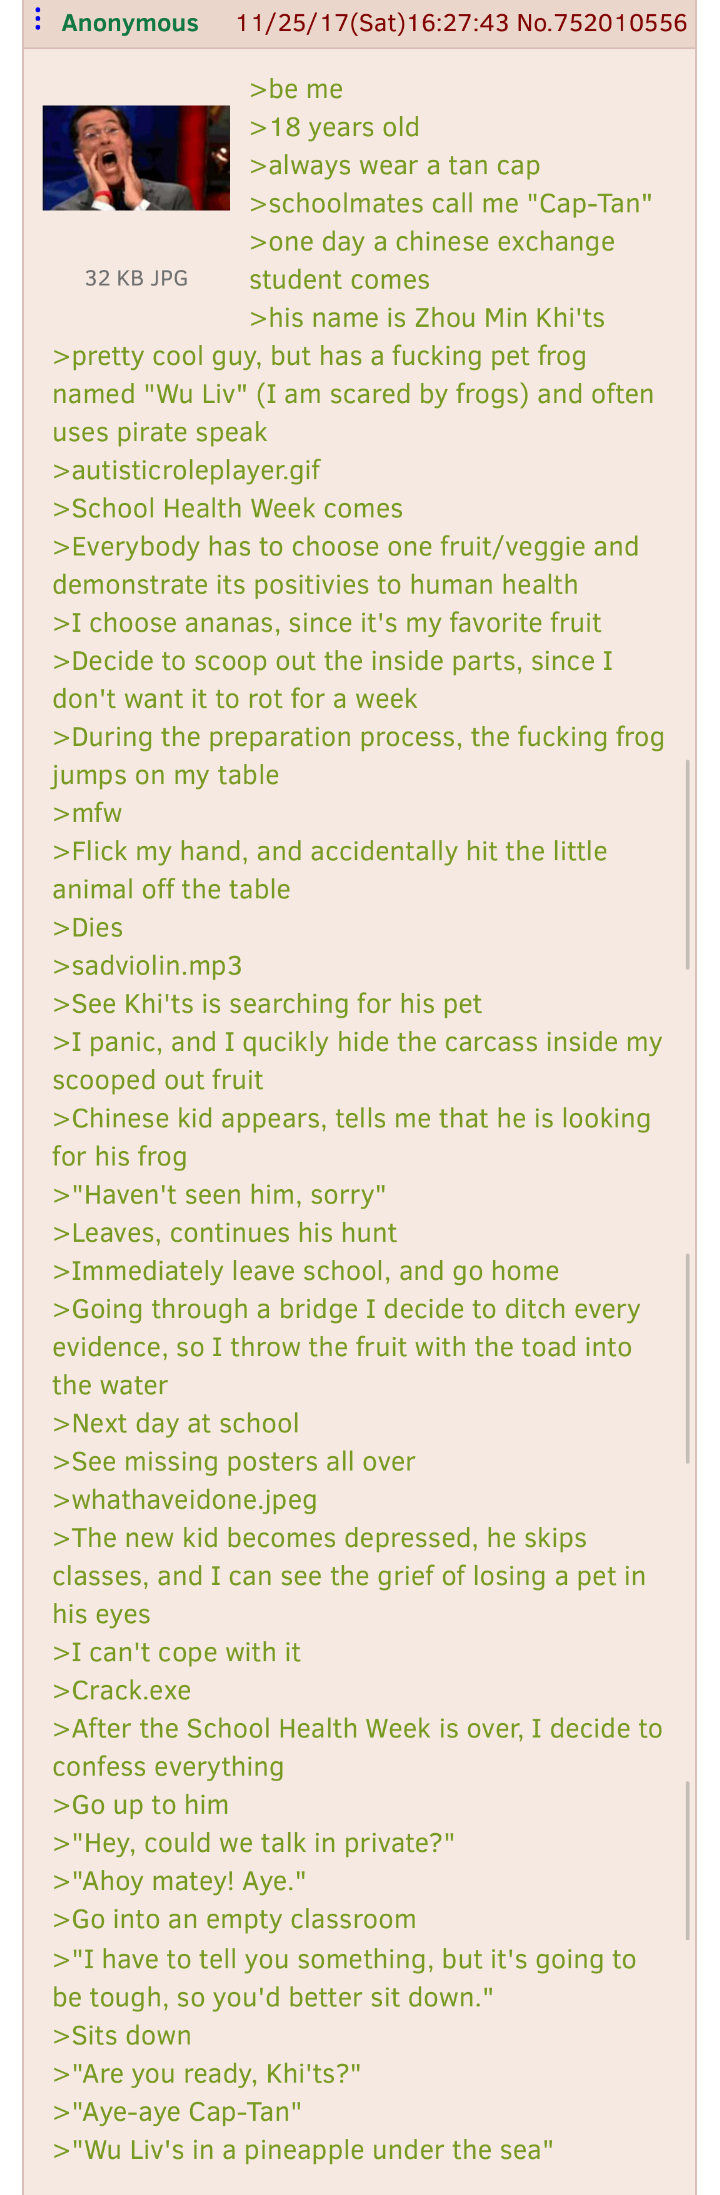 Best greentext in a long time